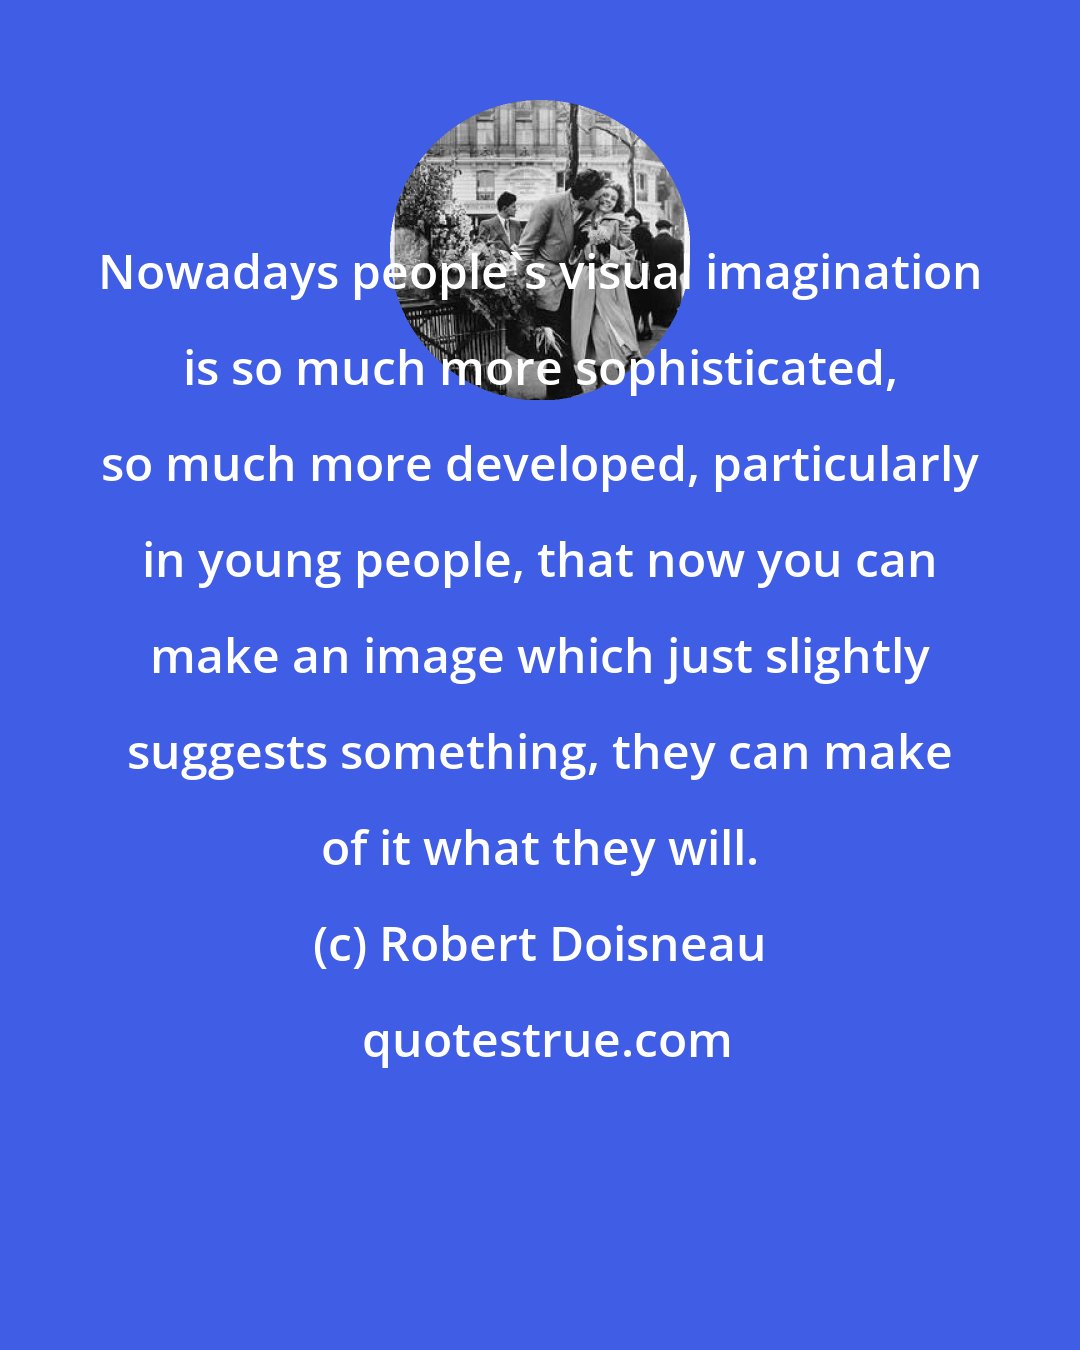 Robert Doisneau: Nowadays people's visual imagination is so much more sophisticated, so much more developed, particularly in young people, that now you can make an image which just slightly suggests something, they can make of it what they will.